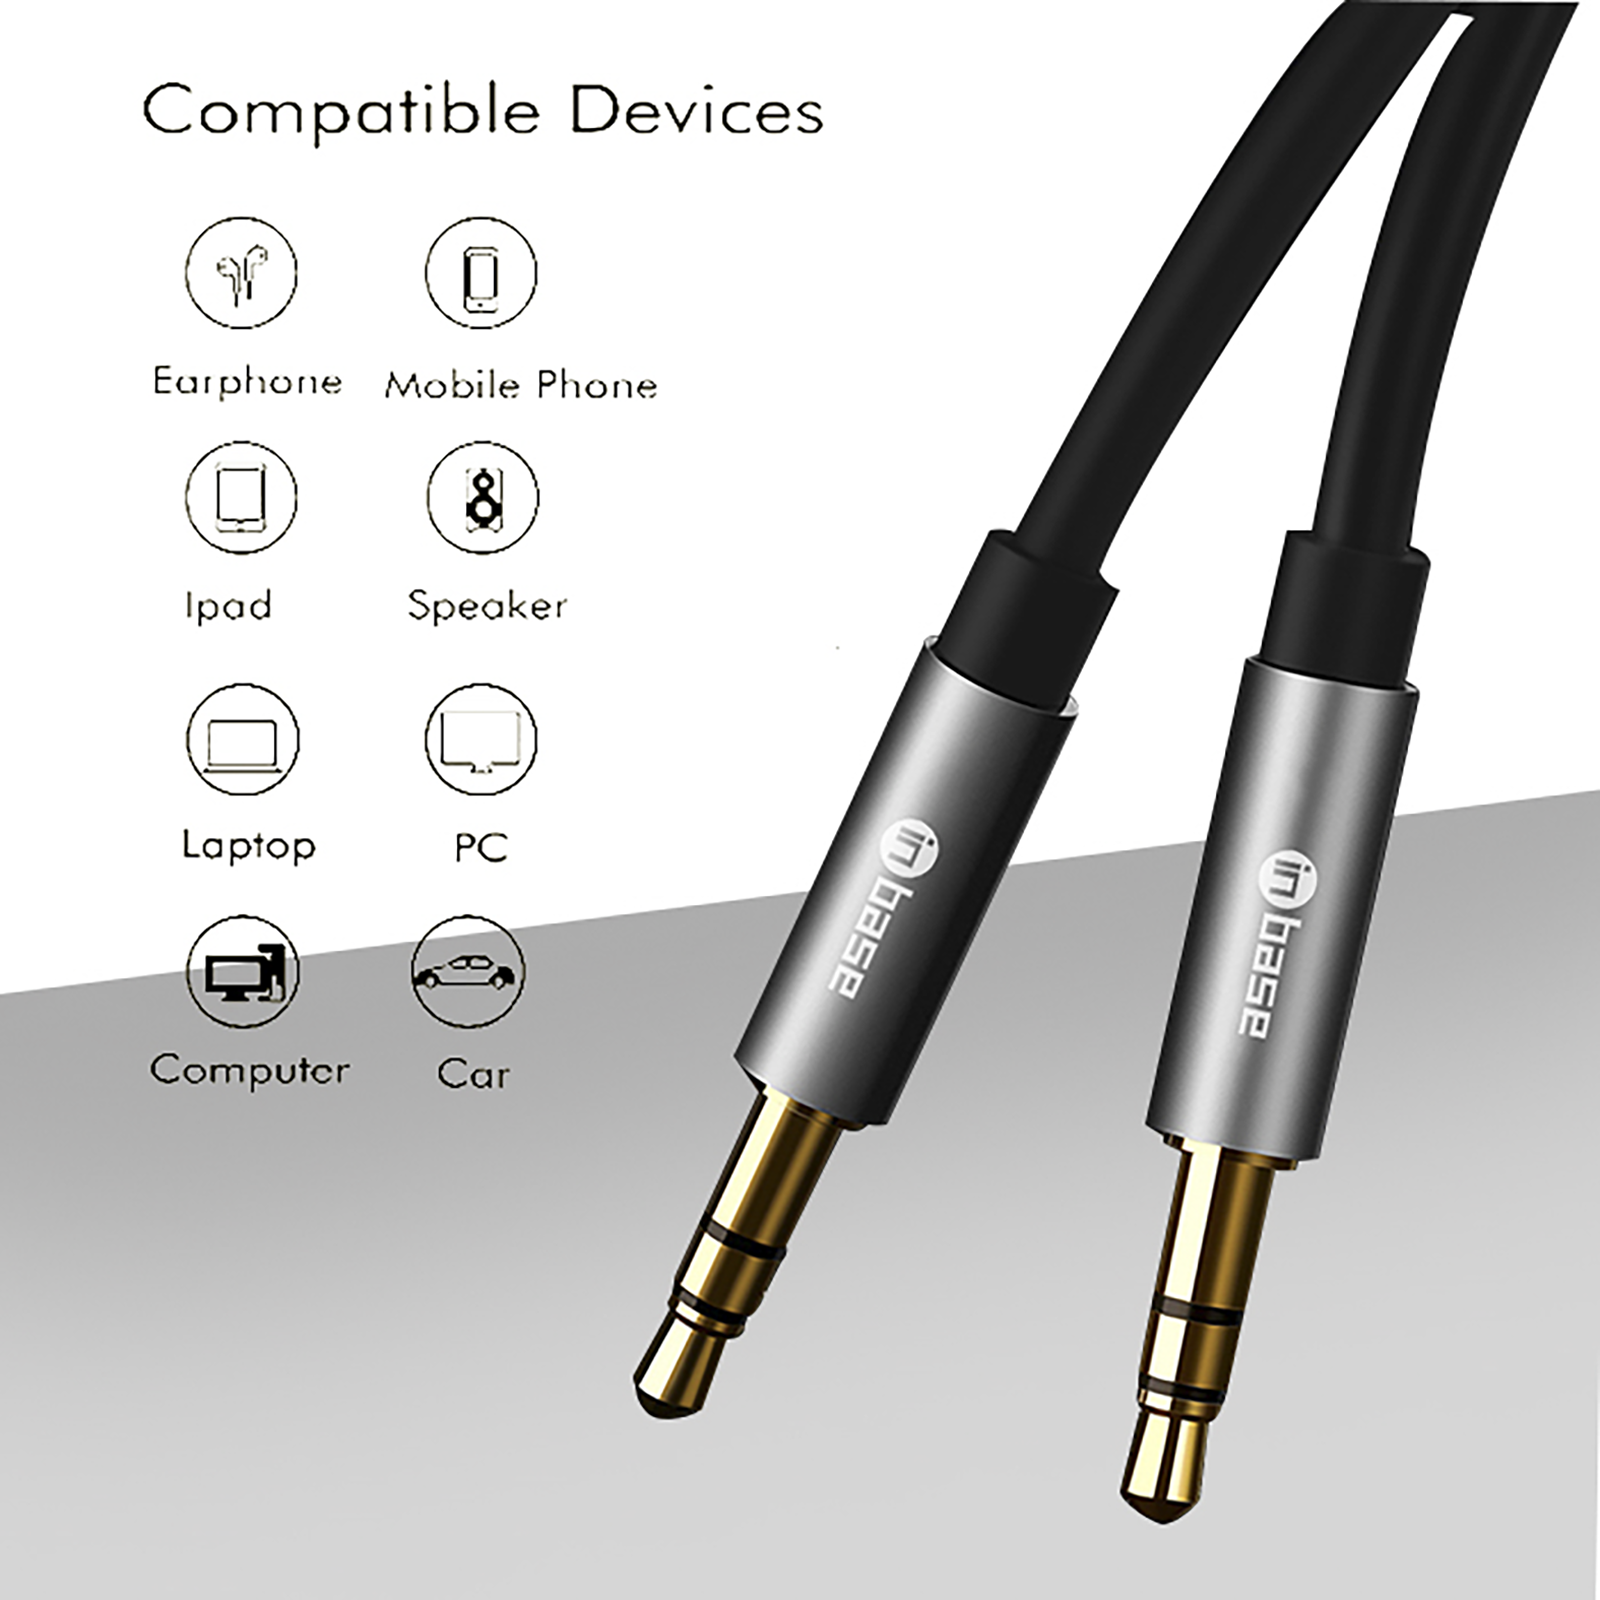 Inbase 3.5mm Aux to 3.5mm Aux 3.9 Feet (1.2M) Cable (Gold Plated Plug,  Black)